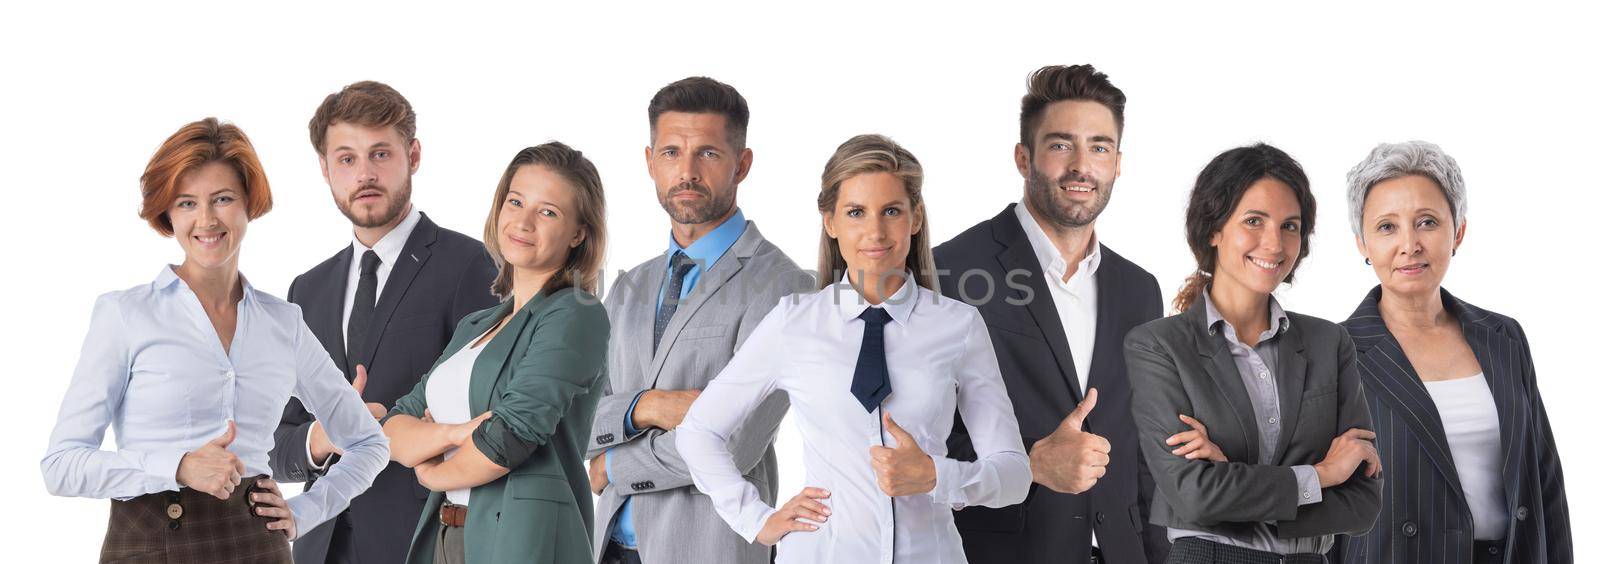 Group happy colleagues as a business team isolated on white background